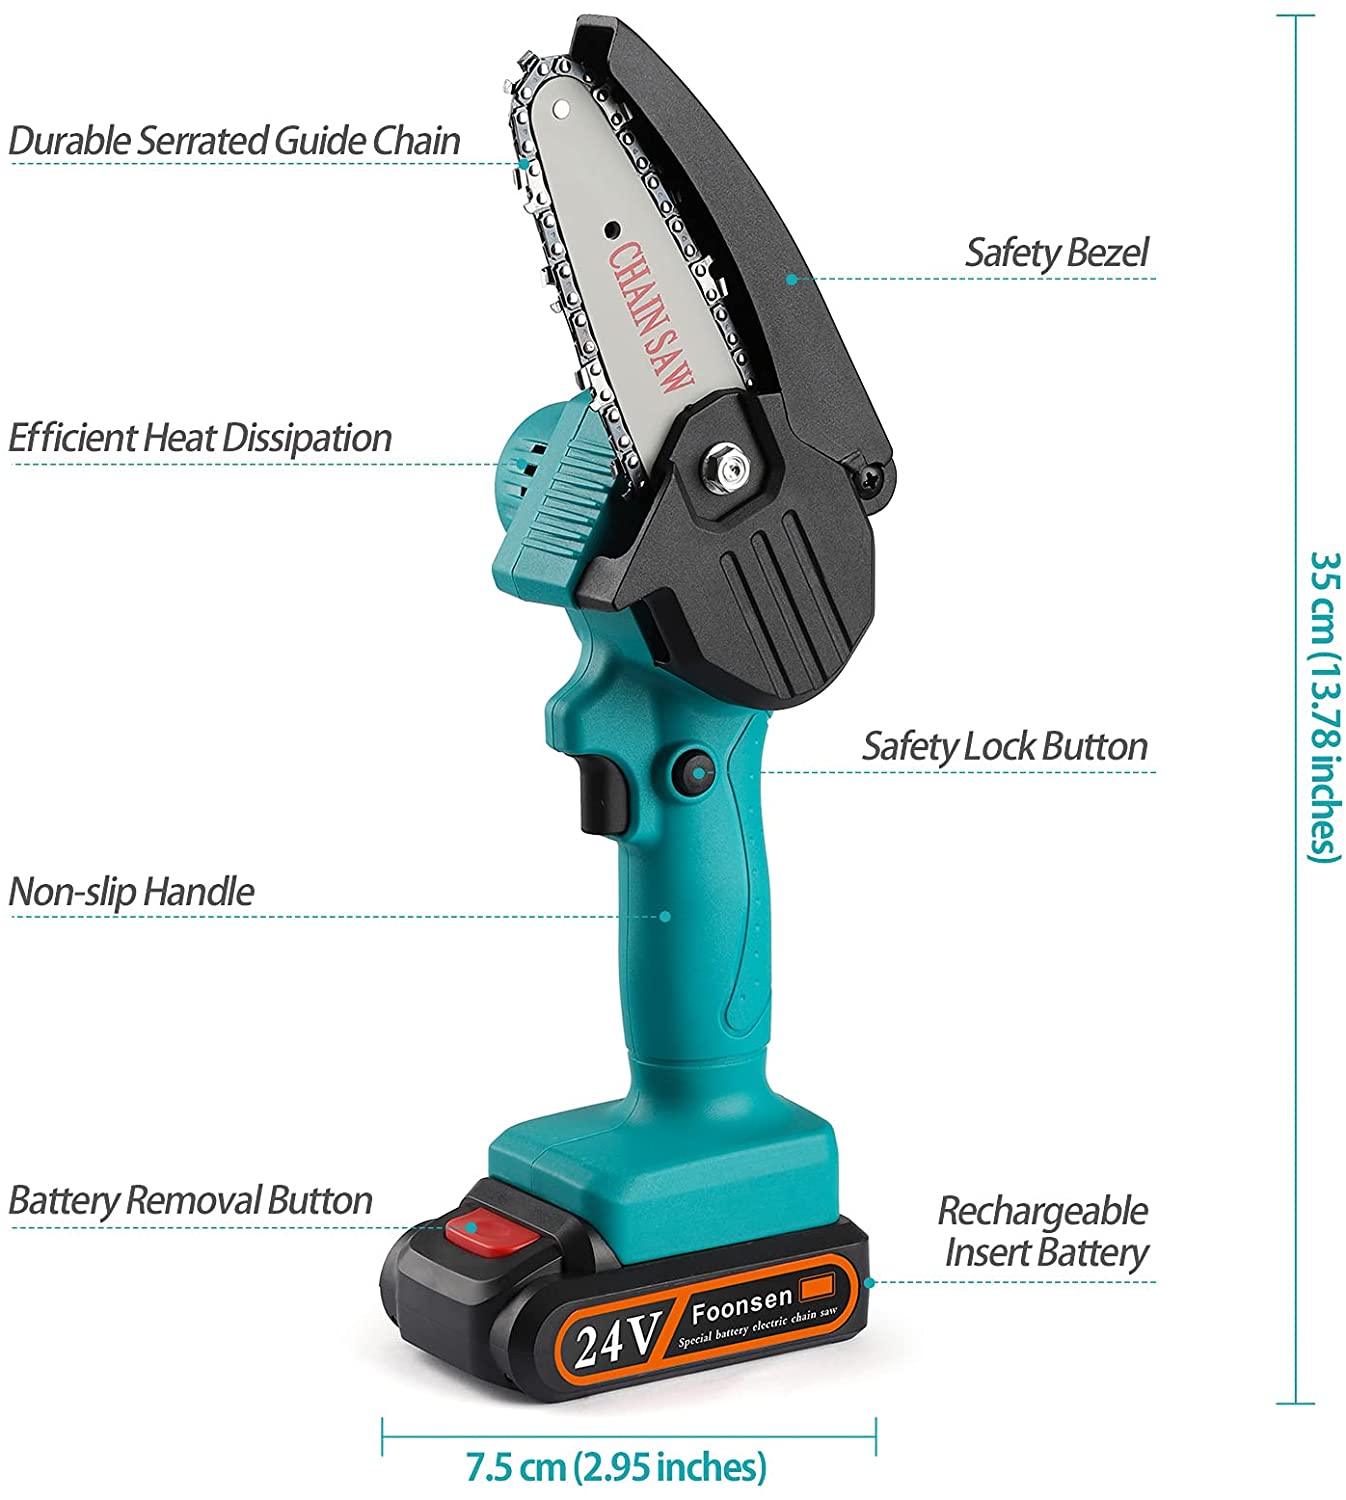 Portable Li-Battery Electric Shear /Garden Tools with Wholesale